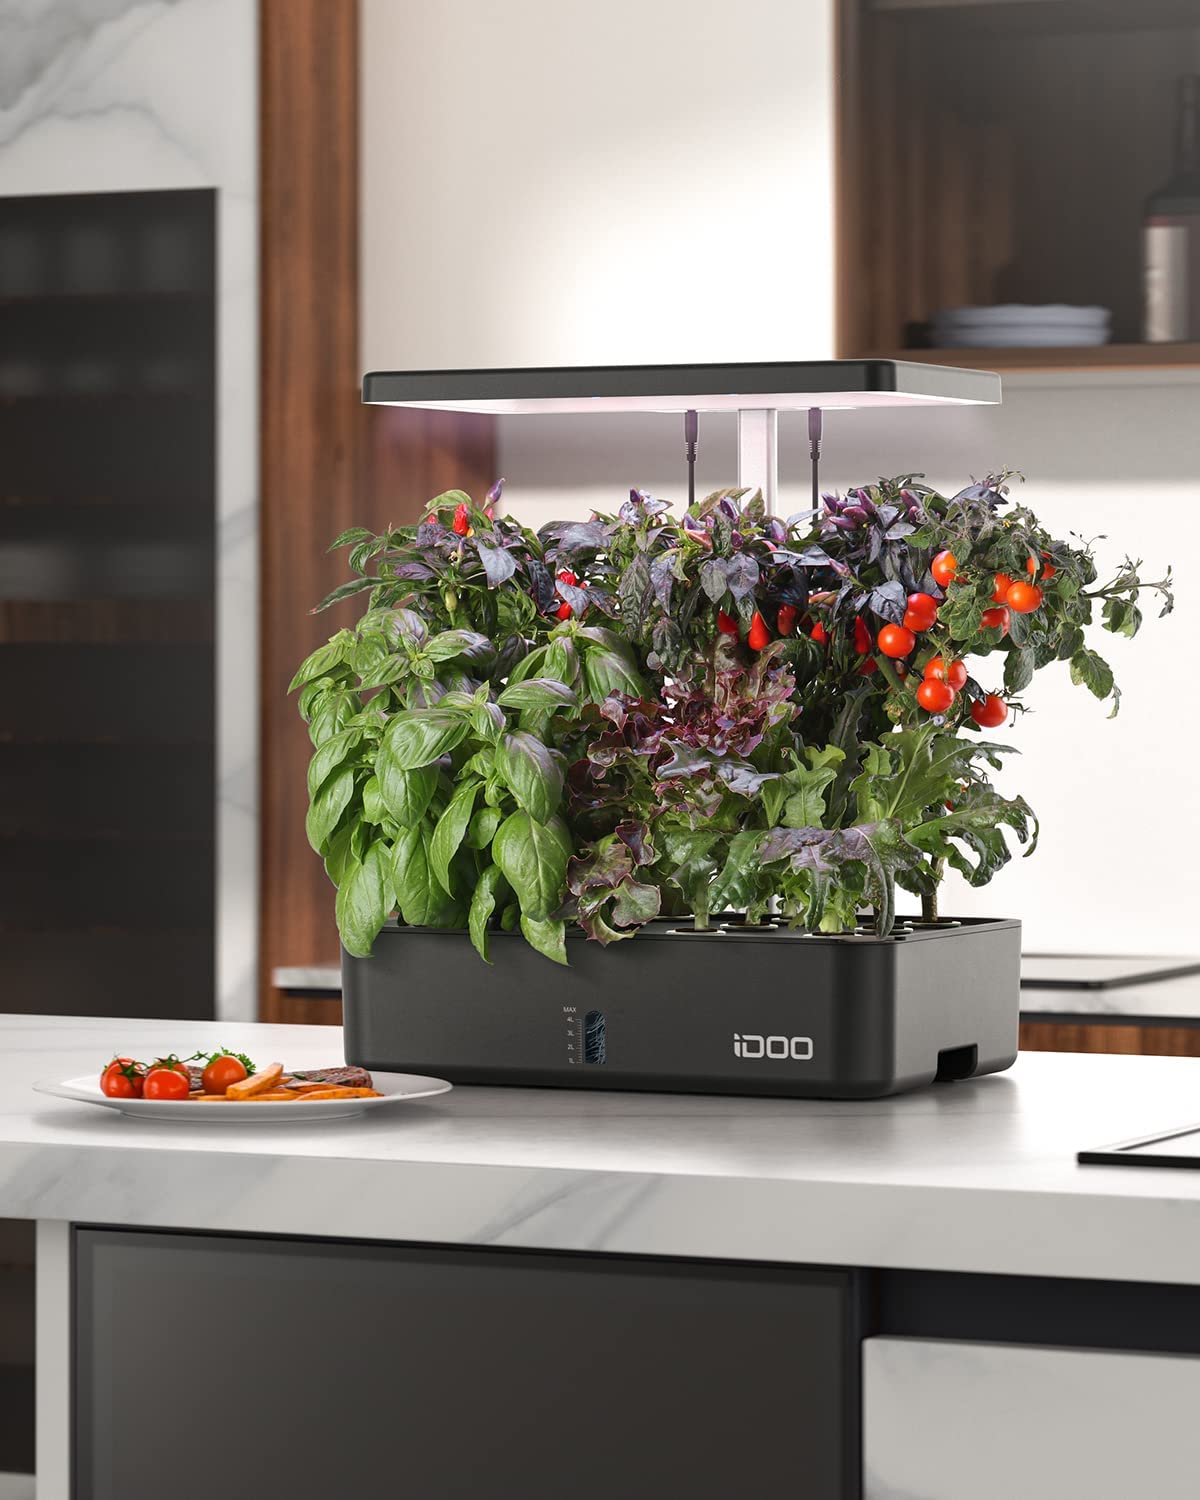 iDOO WiFi 12 Pods Indoor Garden with APP Controlled - 12 Pods _wf_cus Best Seller BFD AU Hydroponic Growing System Wifi by idoo